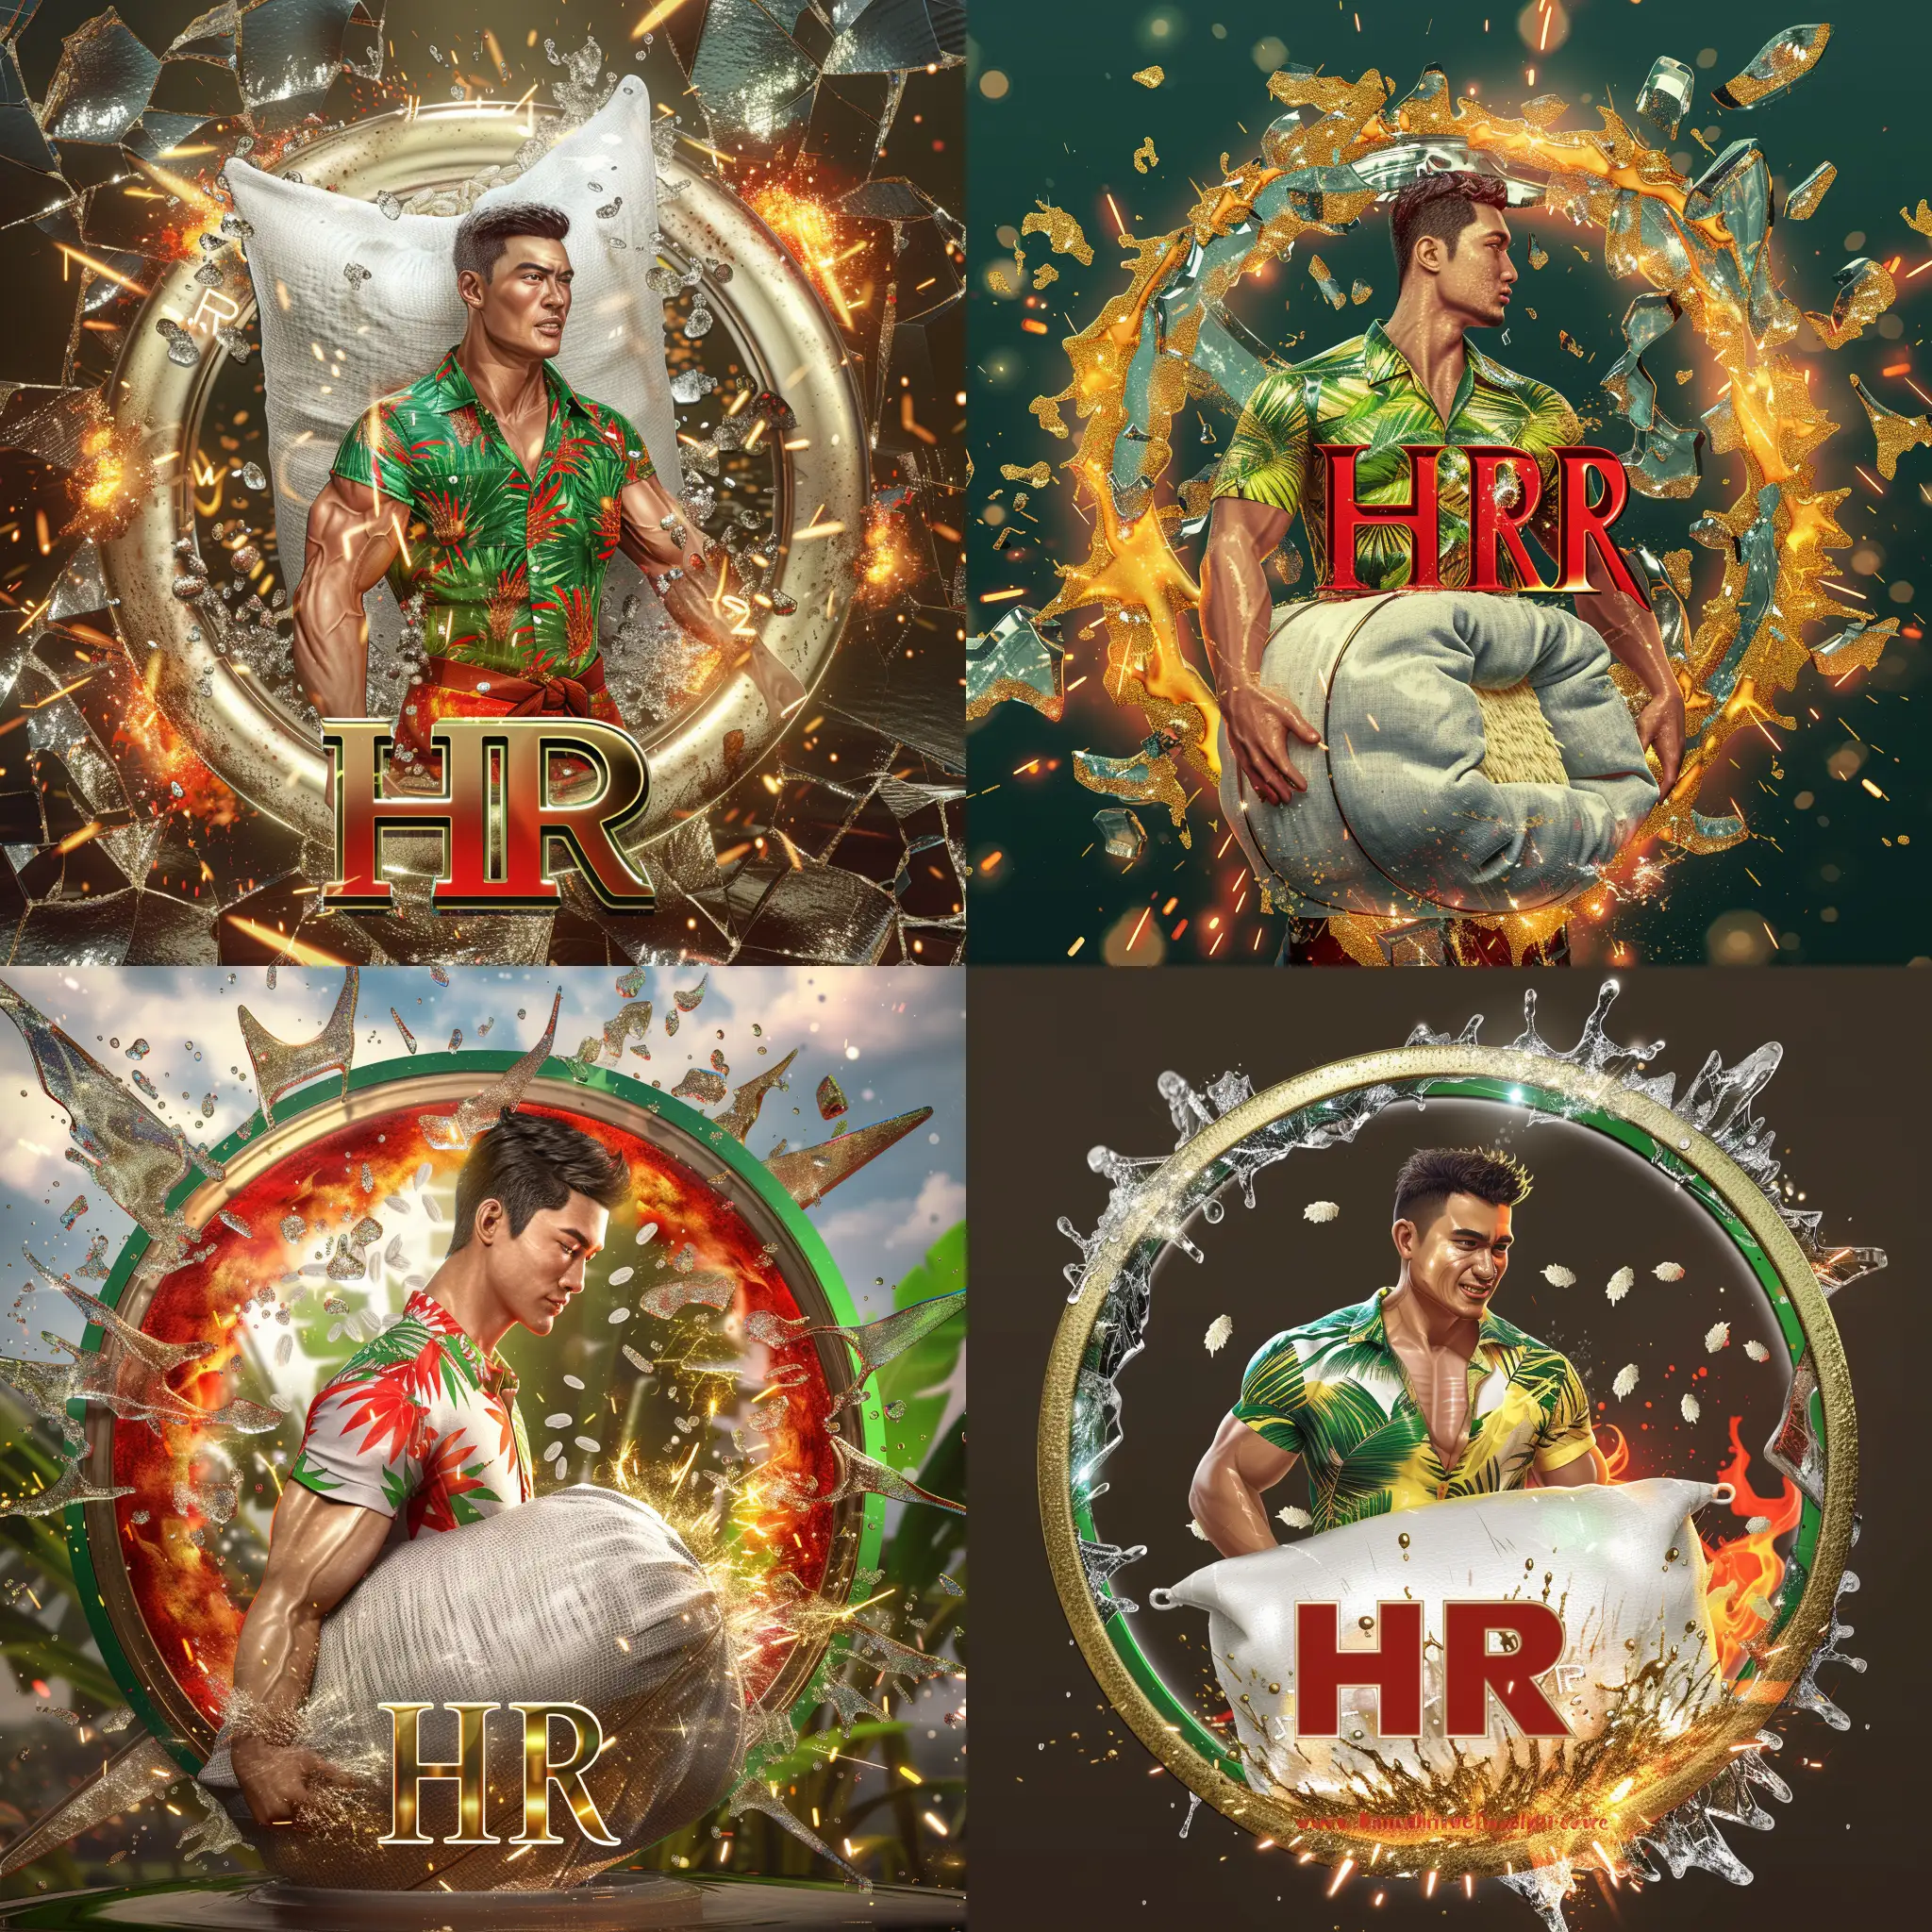 digital airbrush illustration, shiny, 3D realist a man wear tropical shirt muscular body builder young man carriying white sack of rice. logo in a circle with a combination of broken glass, paddy, rice milling machine, with 3D rice outside, fire bursts and water splashes. Sparks appear in metallic gold letters that read "HR" in the bottom of center in red and silver 3D letters with gold and green edges.